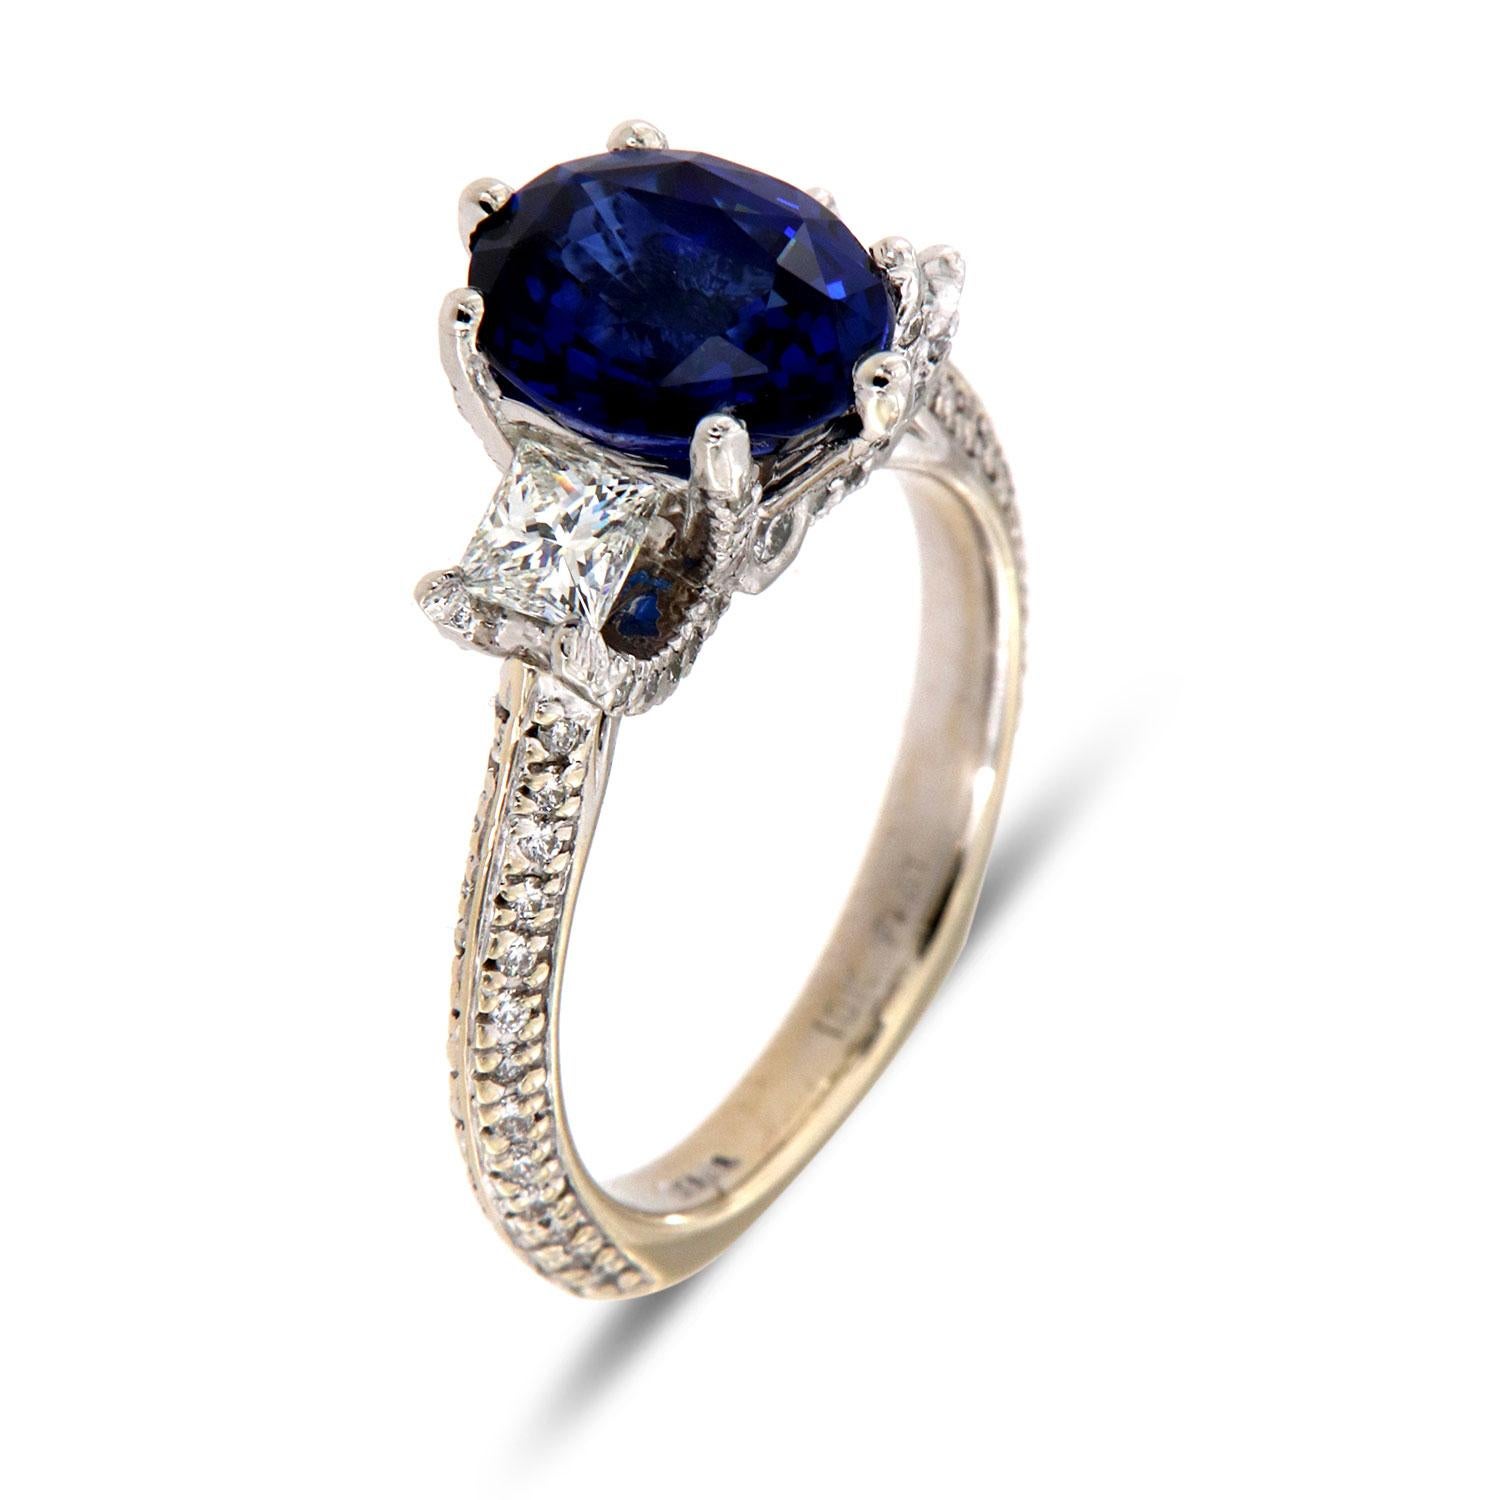 This extraordinary  18K white gold and platinum ring feature a Top Quality 3.54 - carat Blue Oval shape Natural Sapphire  GIA Certificate:2205223812 flanked by perfectly matched Two (2) Princess shape diamonds set within six (6) Delicate prongs.